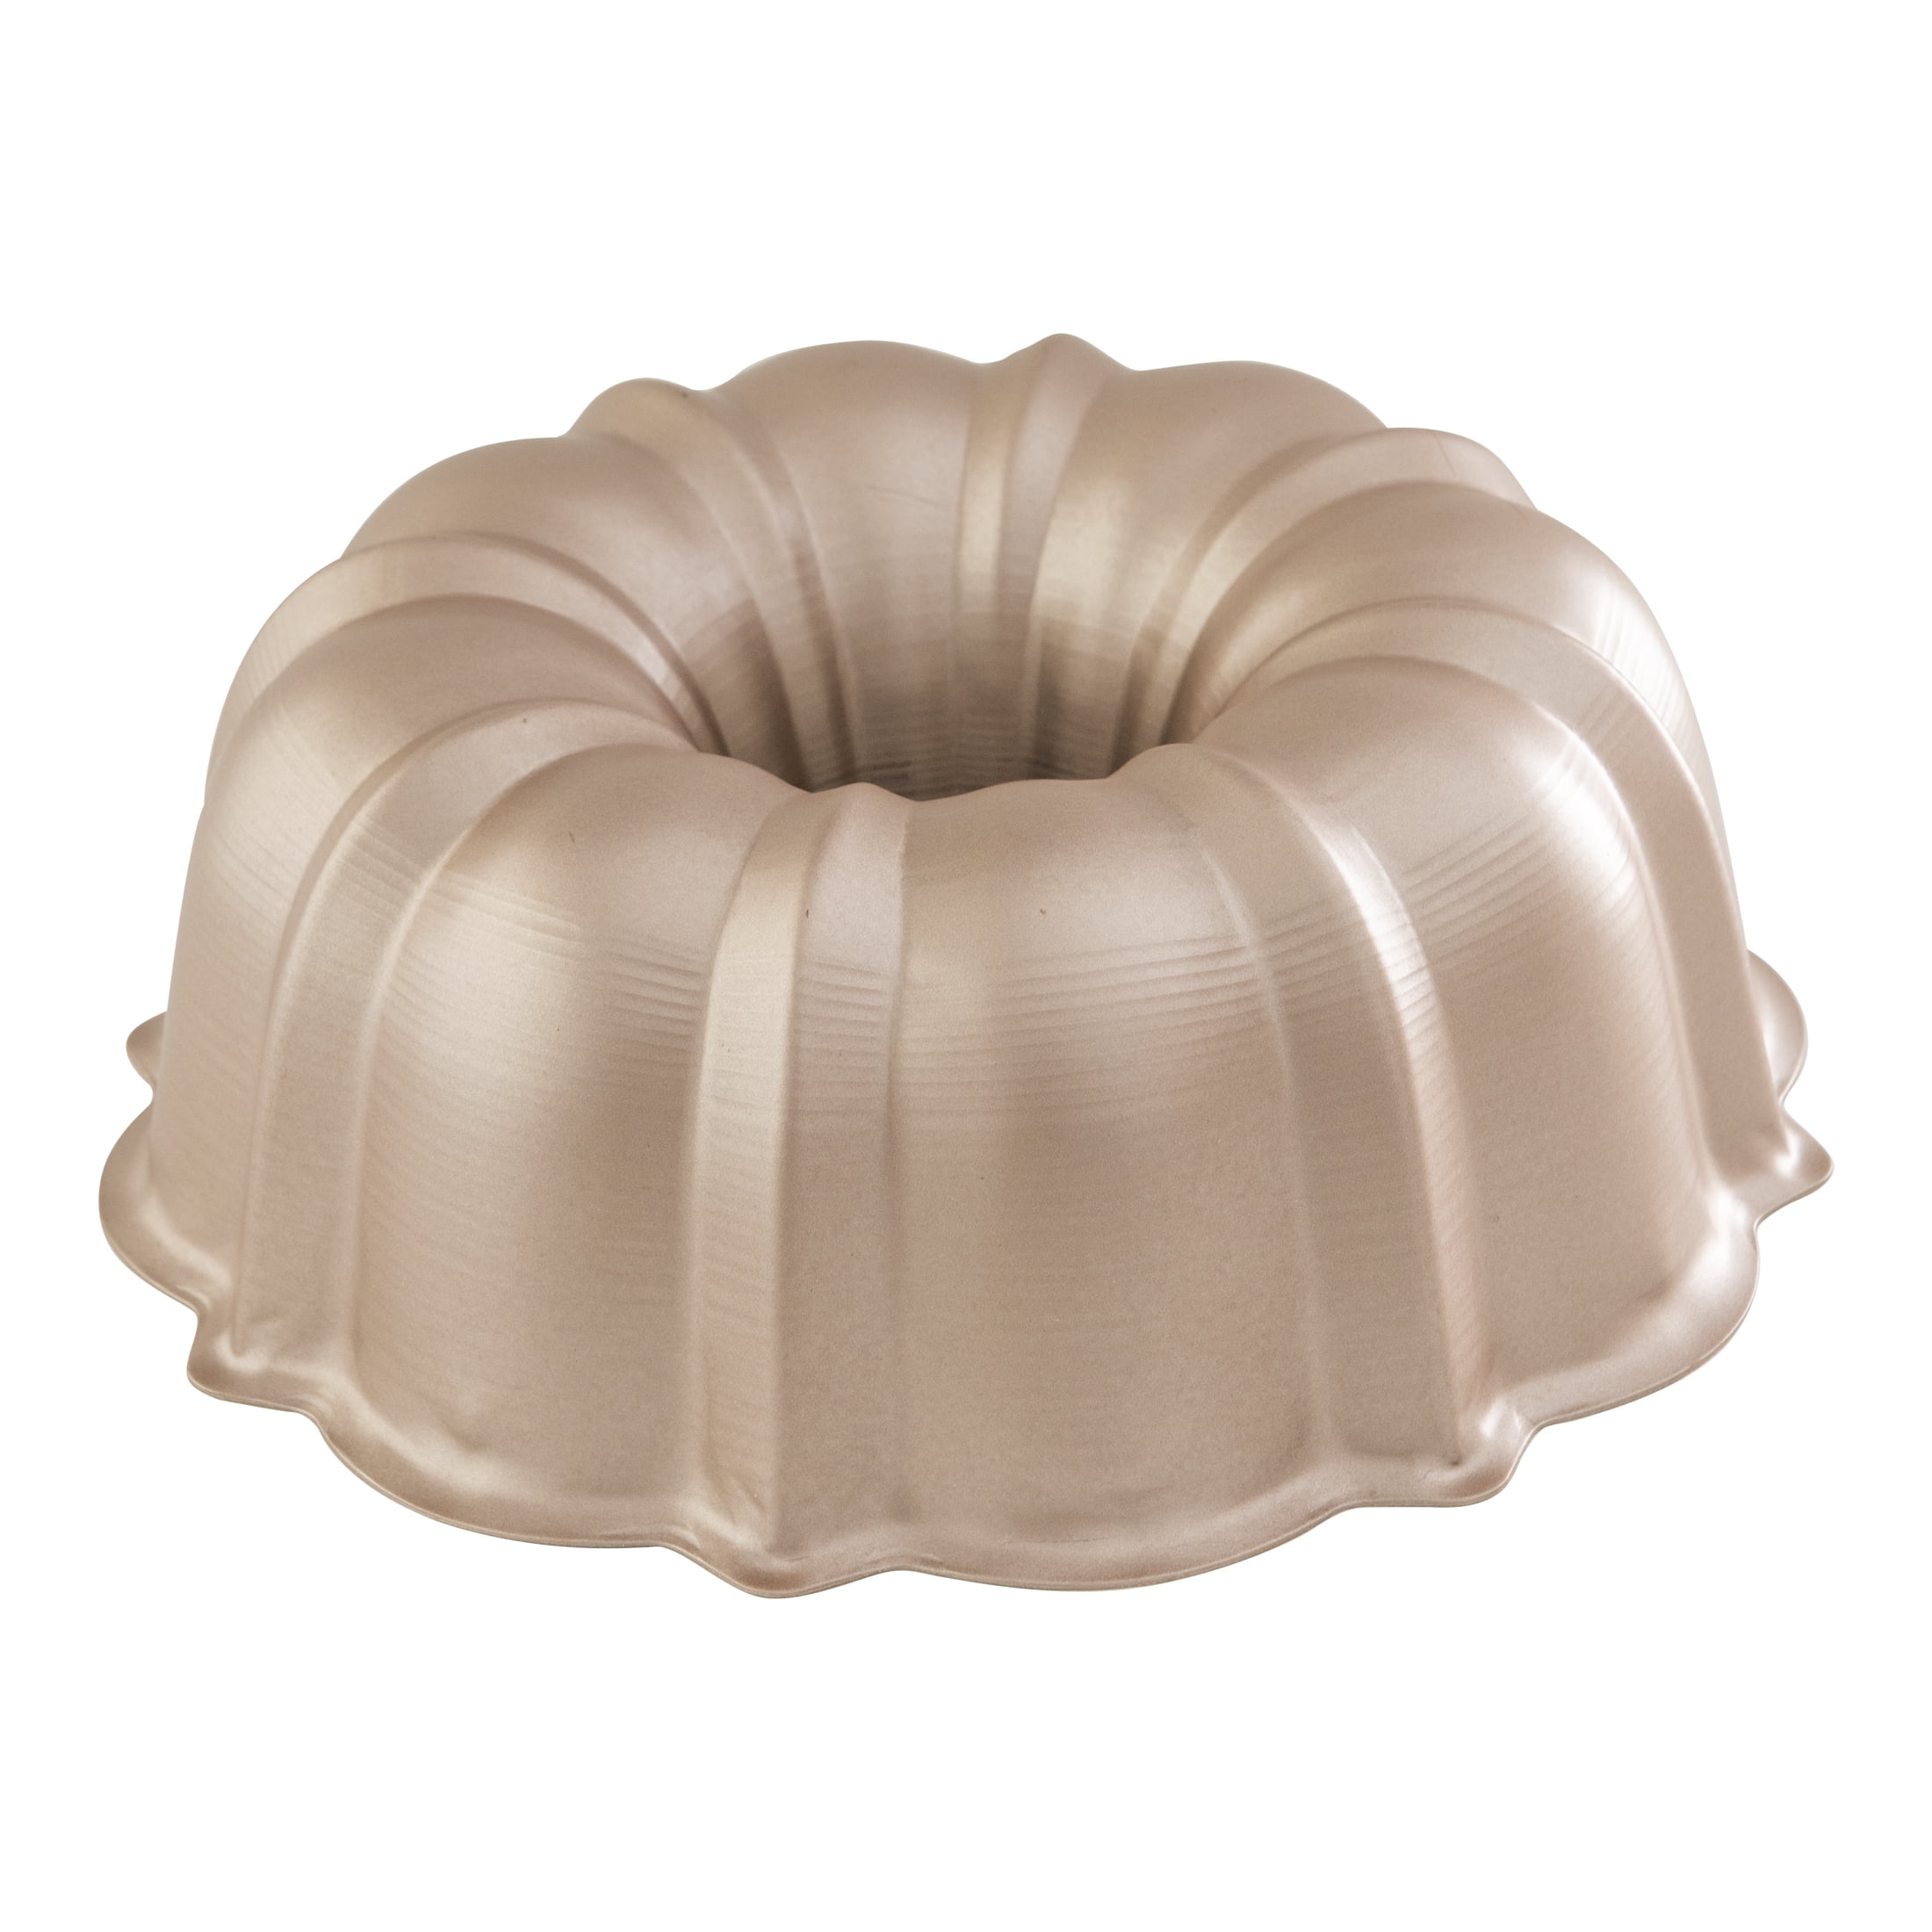 2 pc Silicone Bundt Cake Pan Nonstick Fulted Gelatin Baking Mold, 2  Sizes,9 in diameter x 4deep,and 7.68in diameter x 3.07,Red